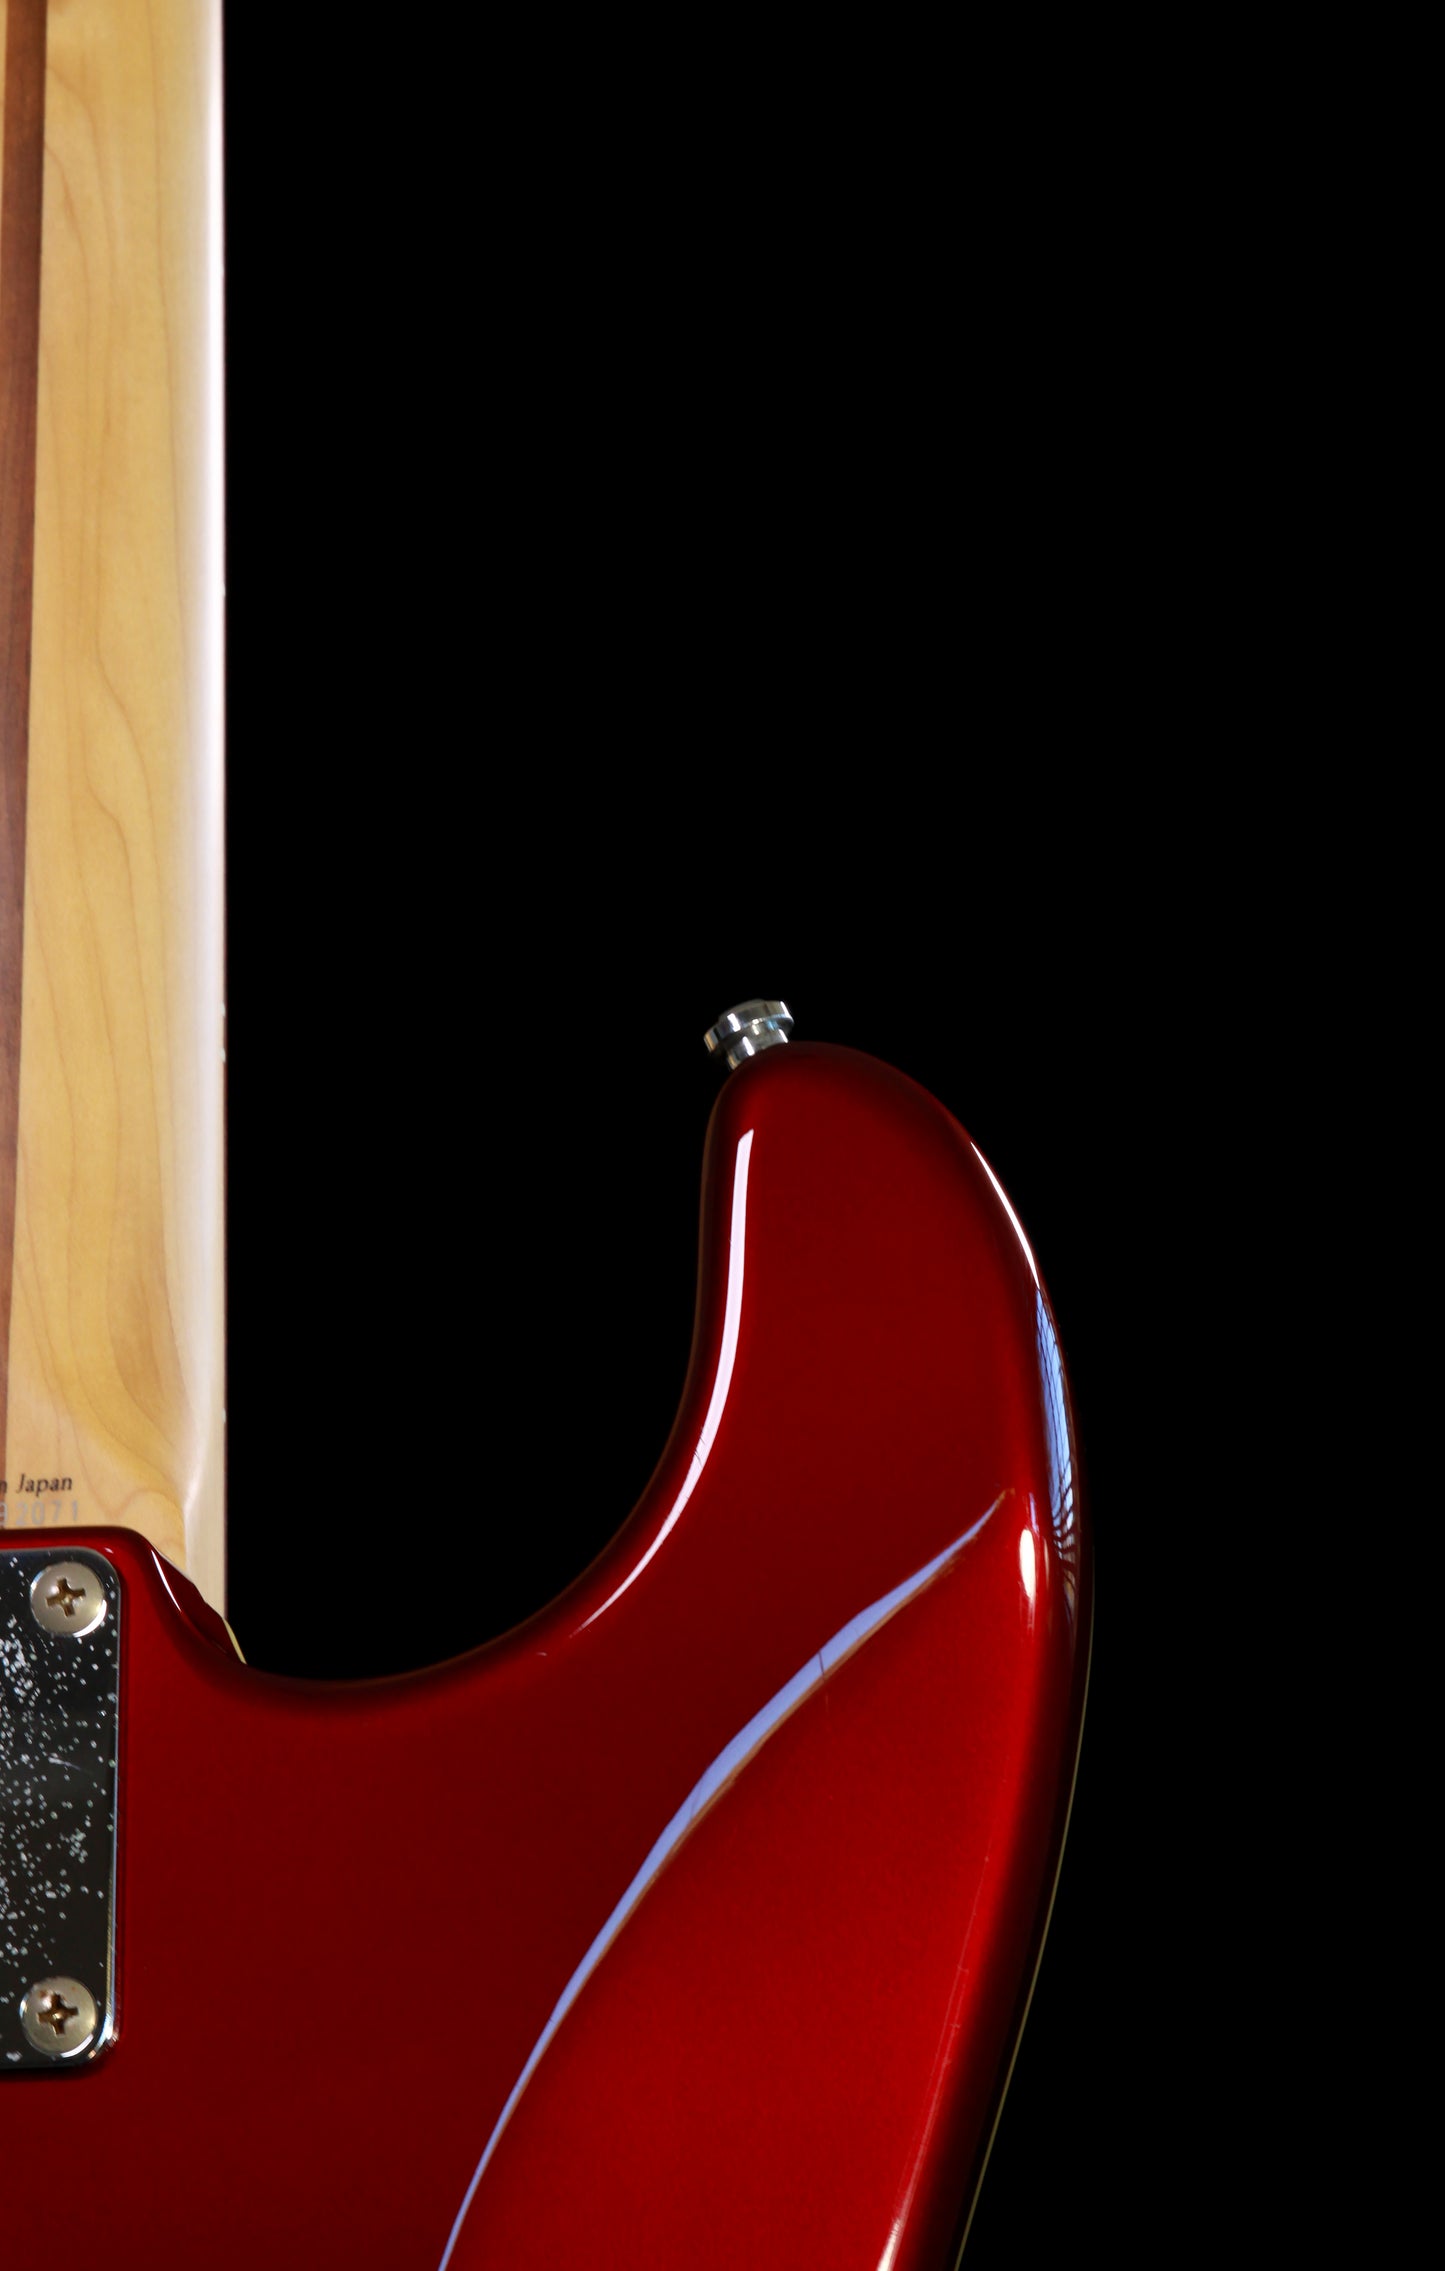 Fender Aerodyne Stratocaster Old Candy Apple Red